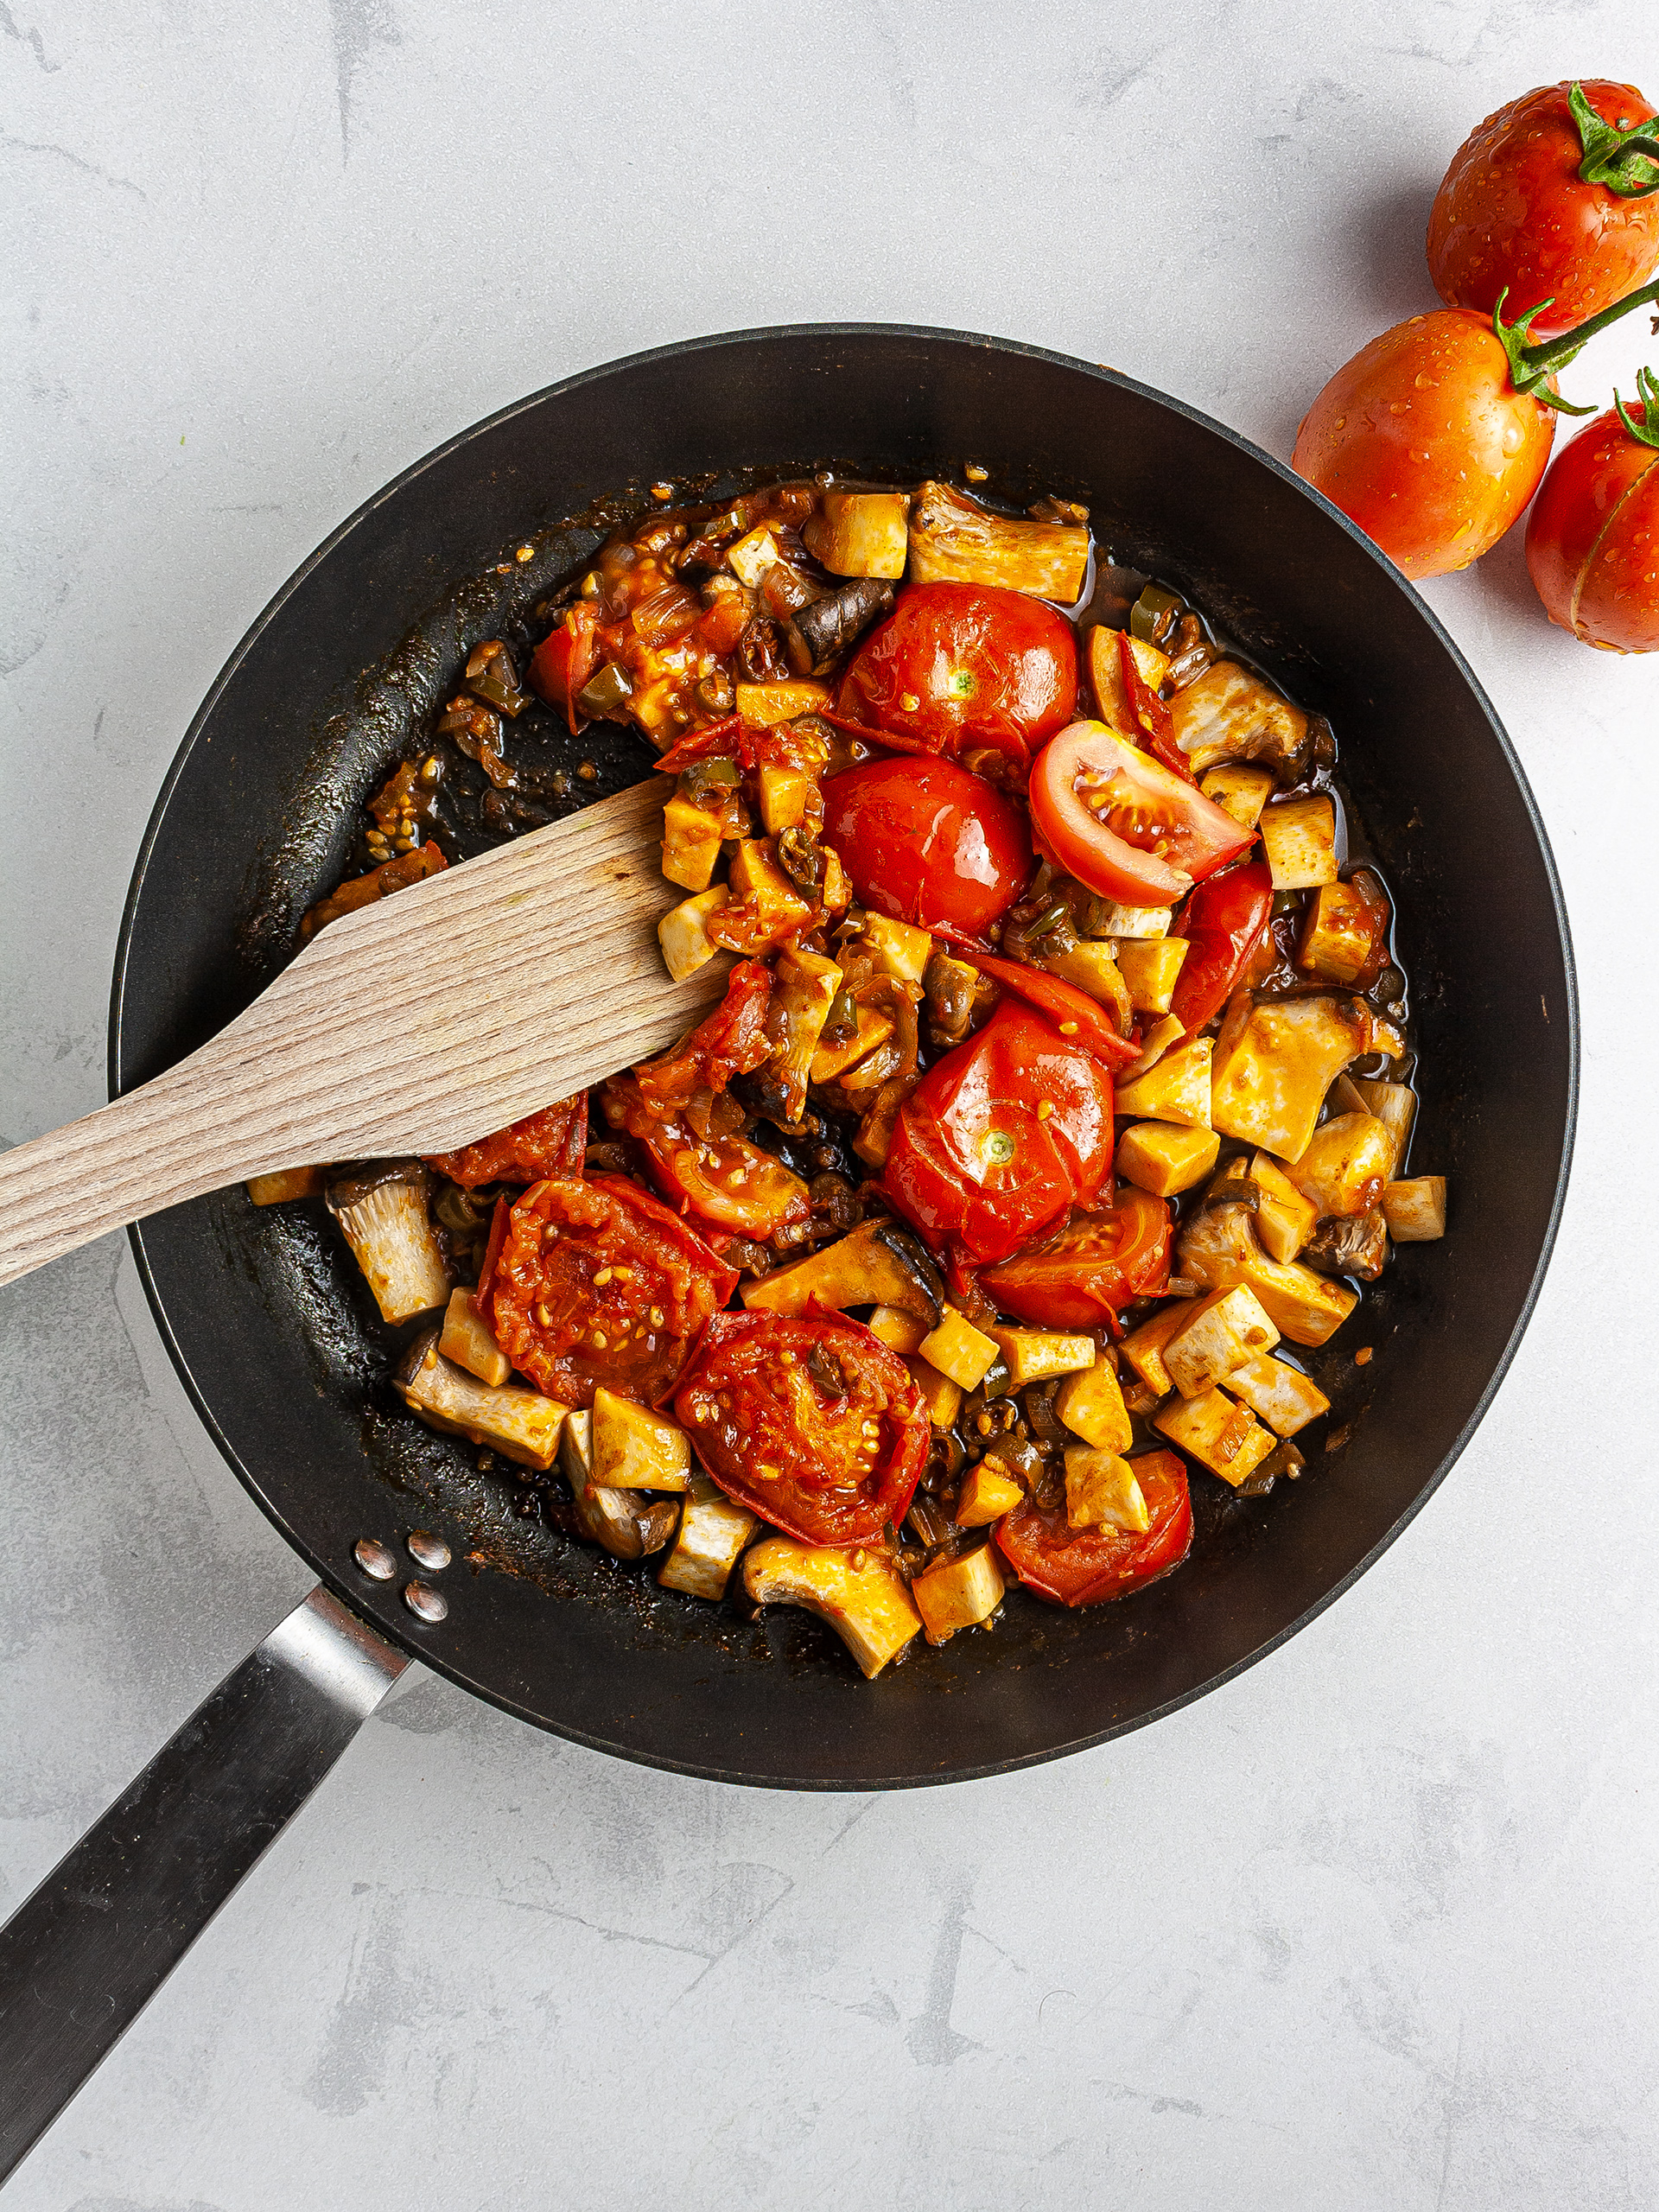 Tomatoes and mushrooms stir-fry